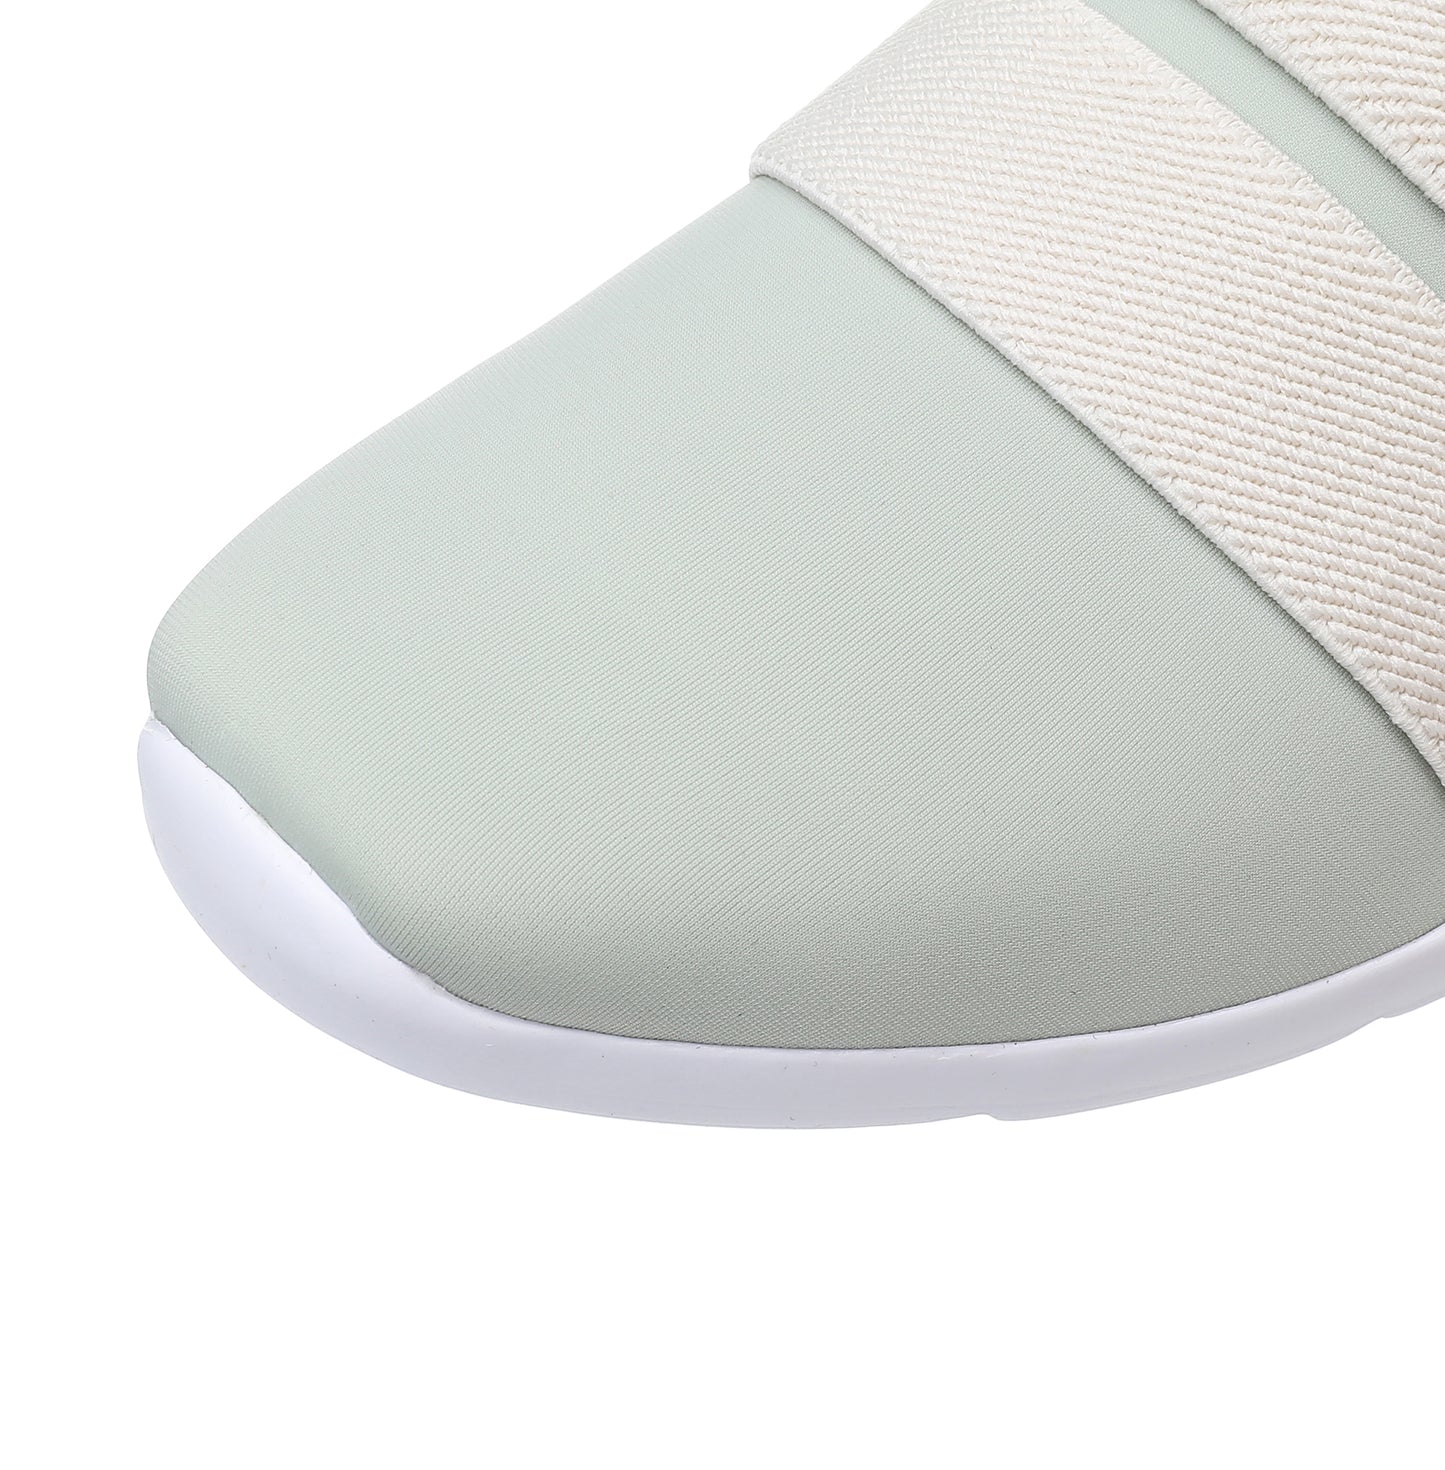 Airy Comfort Sneakers - Mint (S005034)